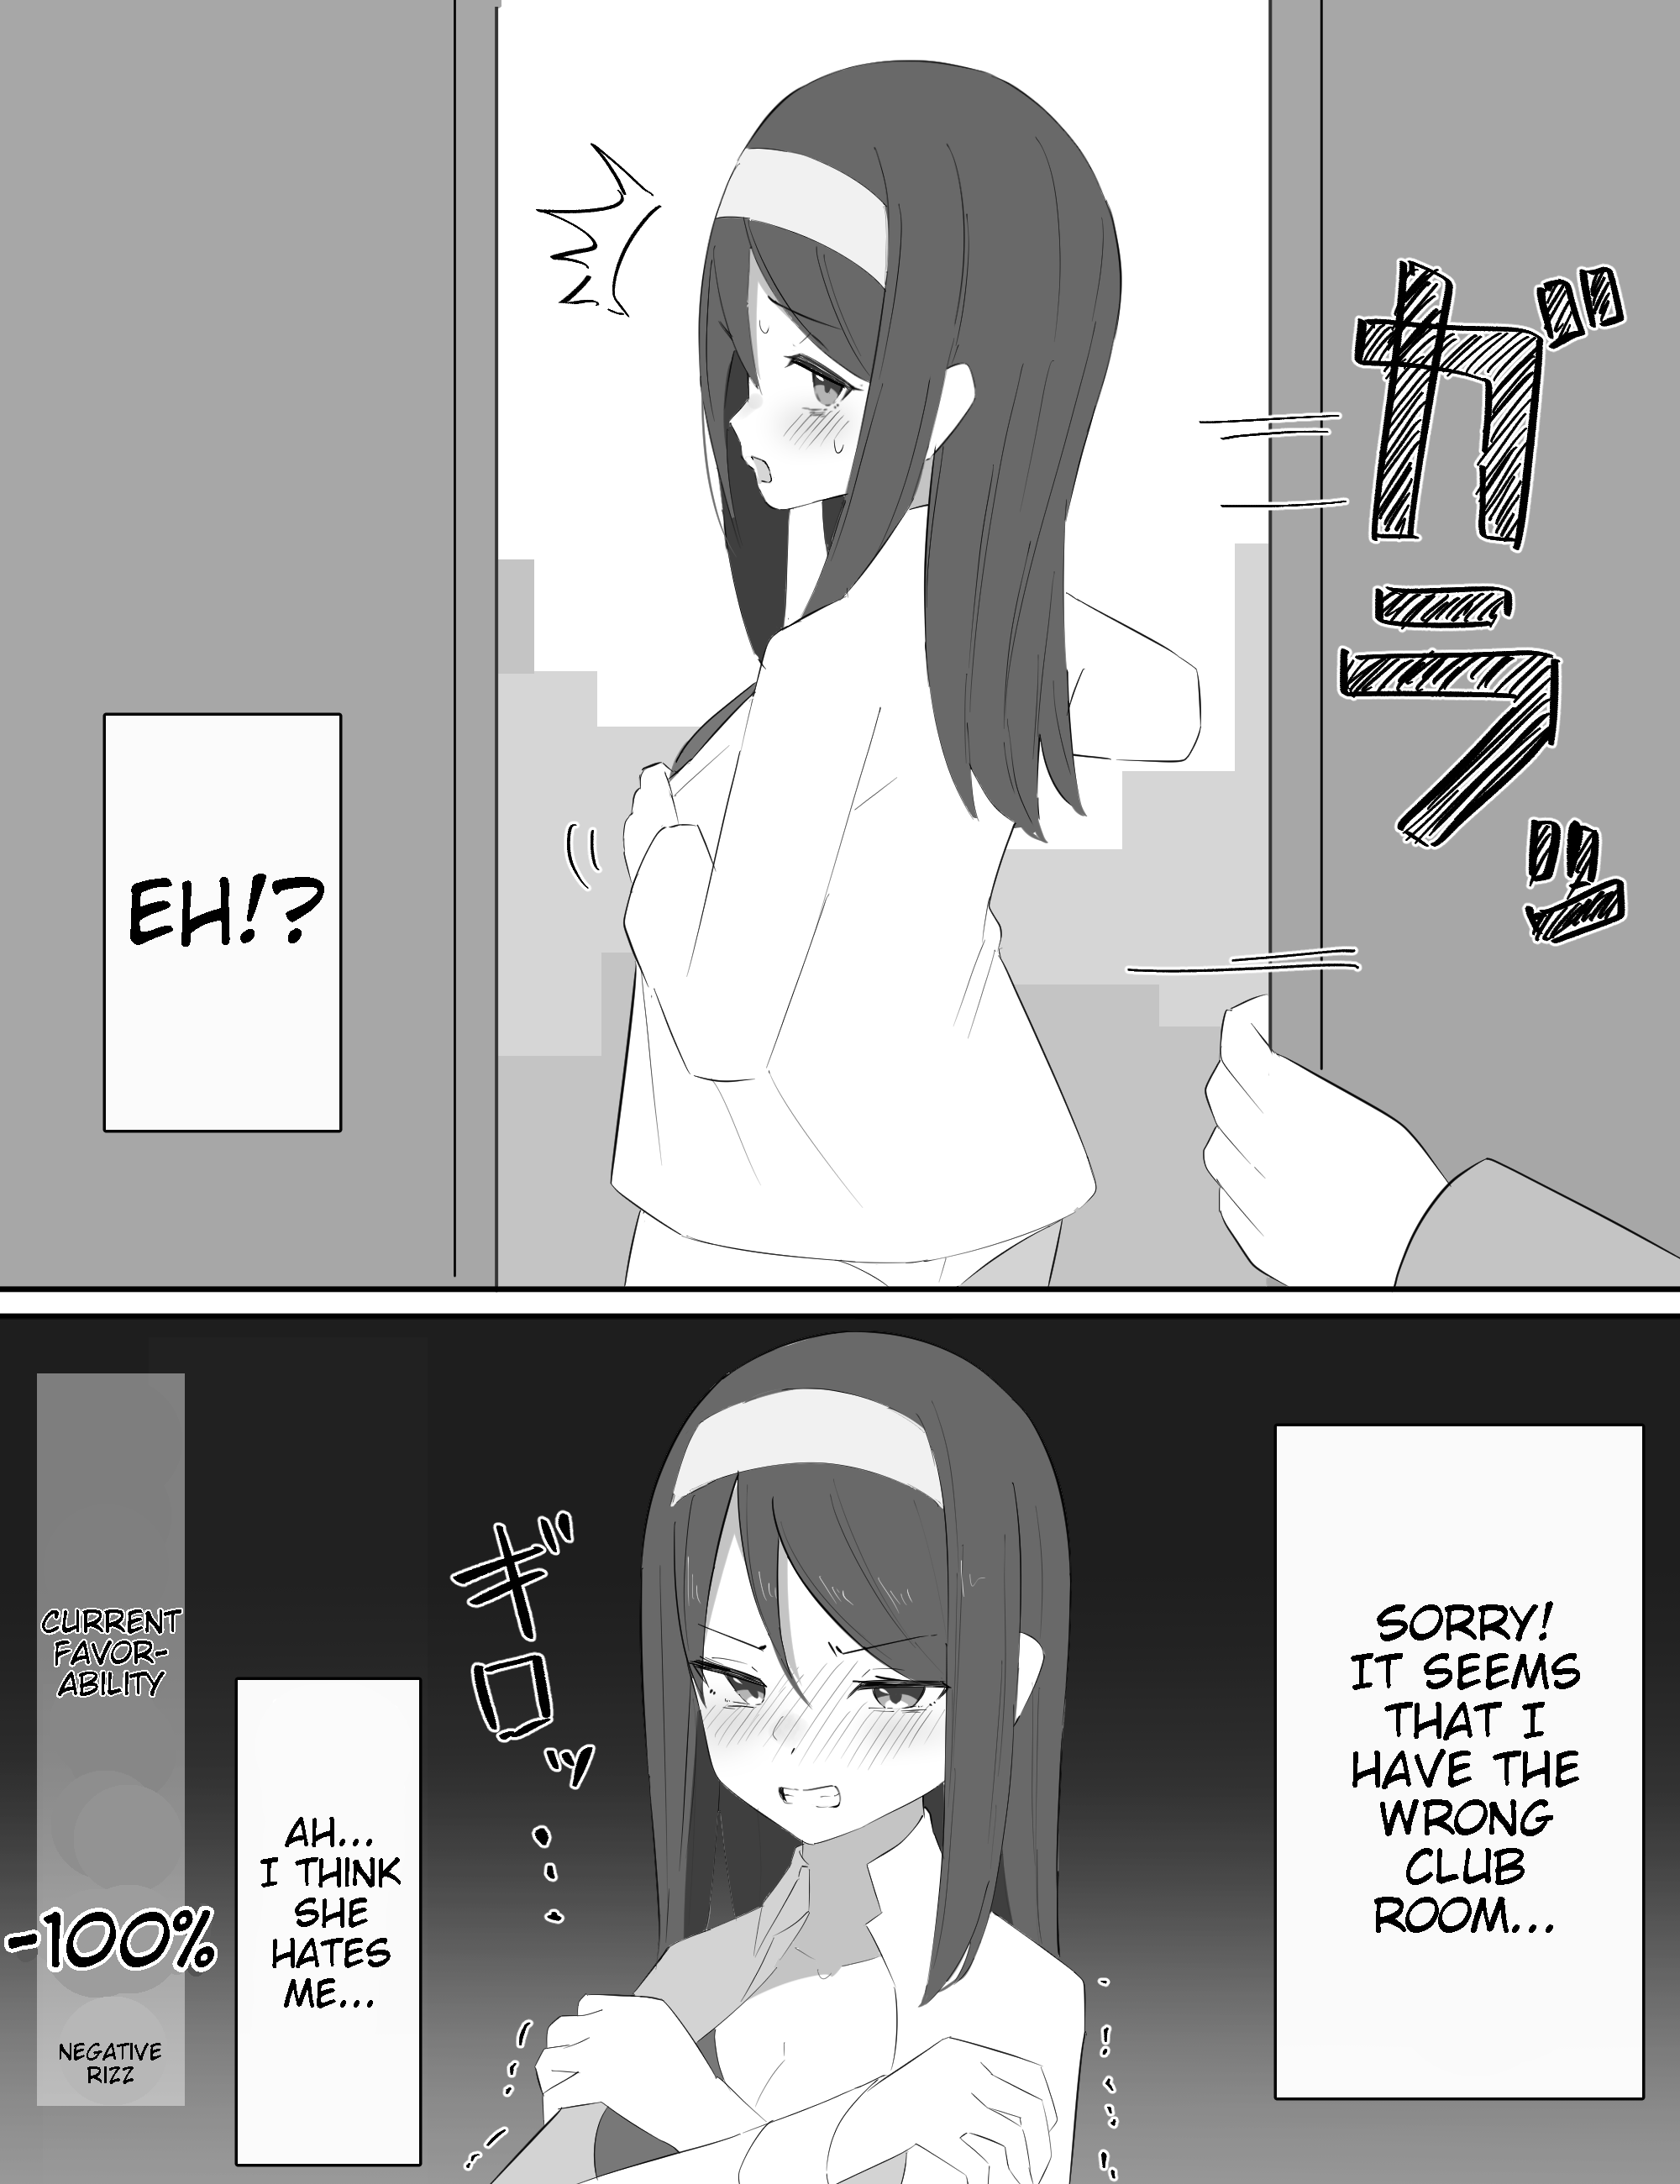 The Cool Classmate Whose Favorability Gradually Changes - Page 1